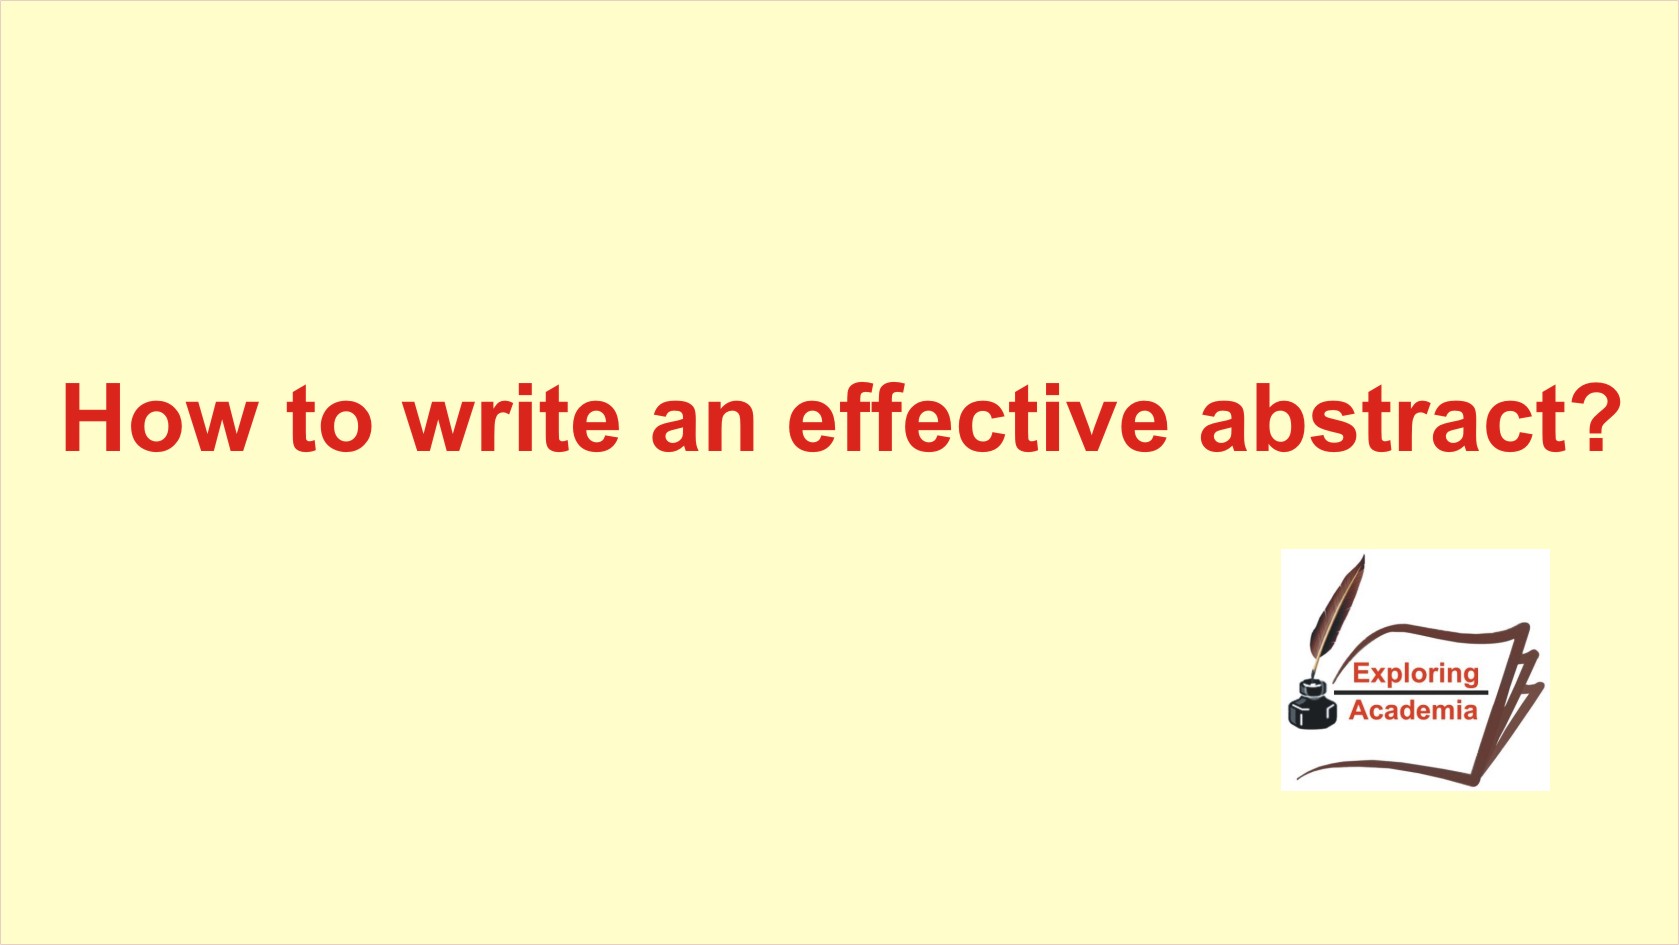 How to write an effective abstract